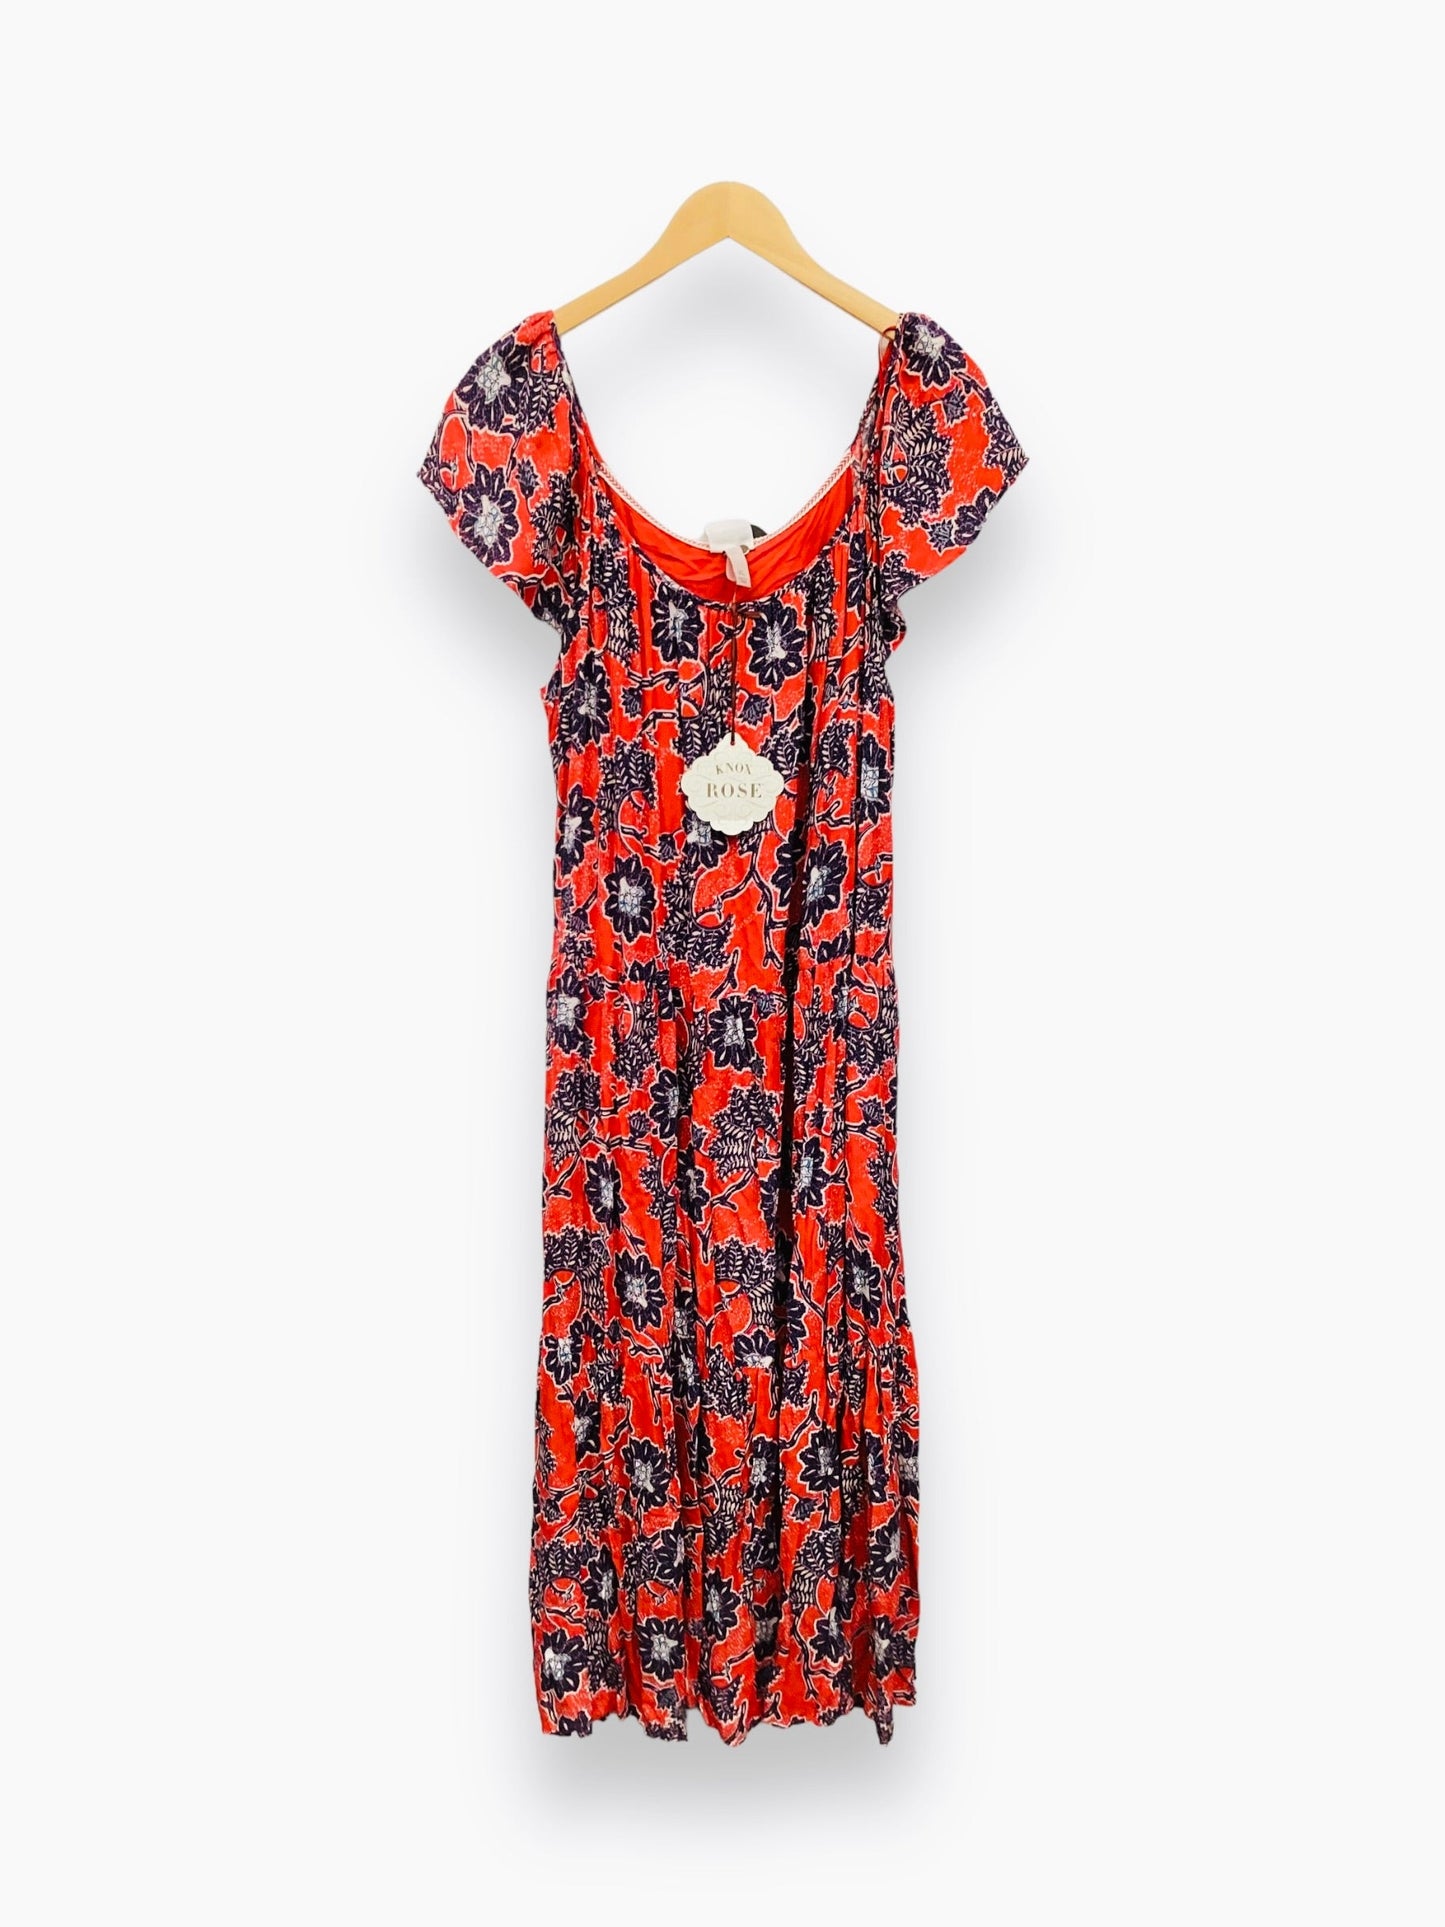 NWT Blue & Red & White Dress Casual Maxi Knox Rose, Size Xl